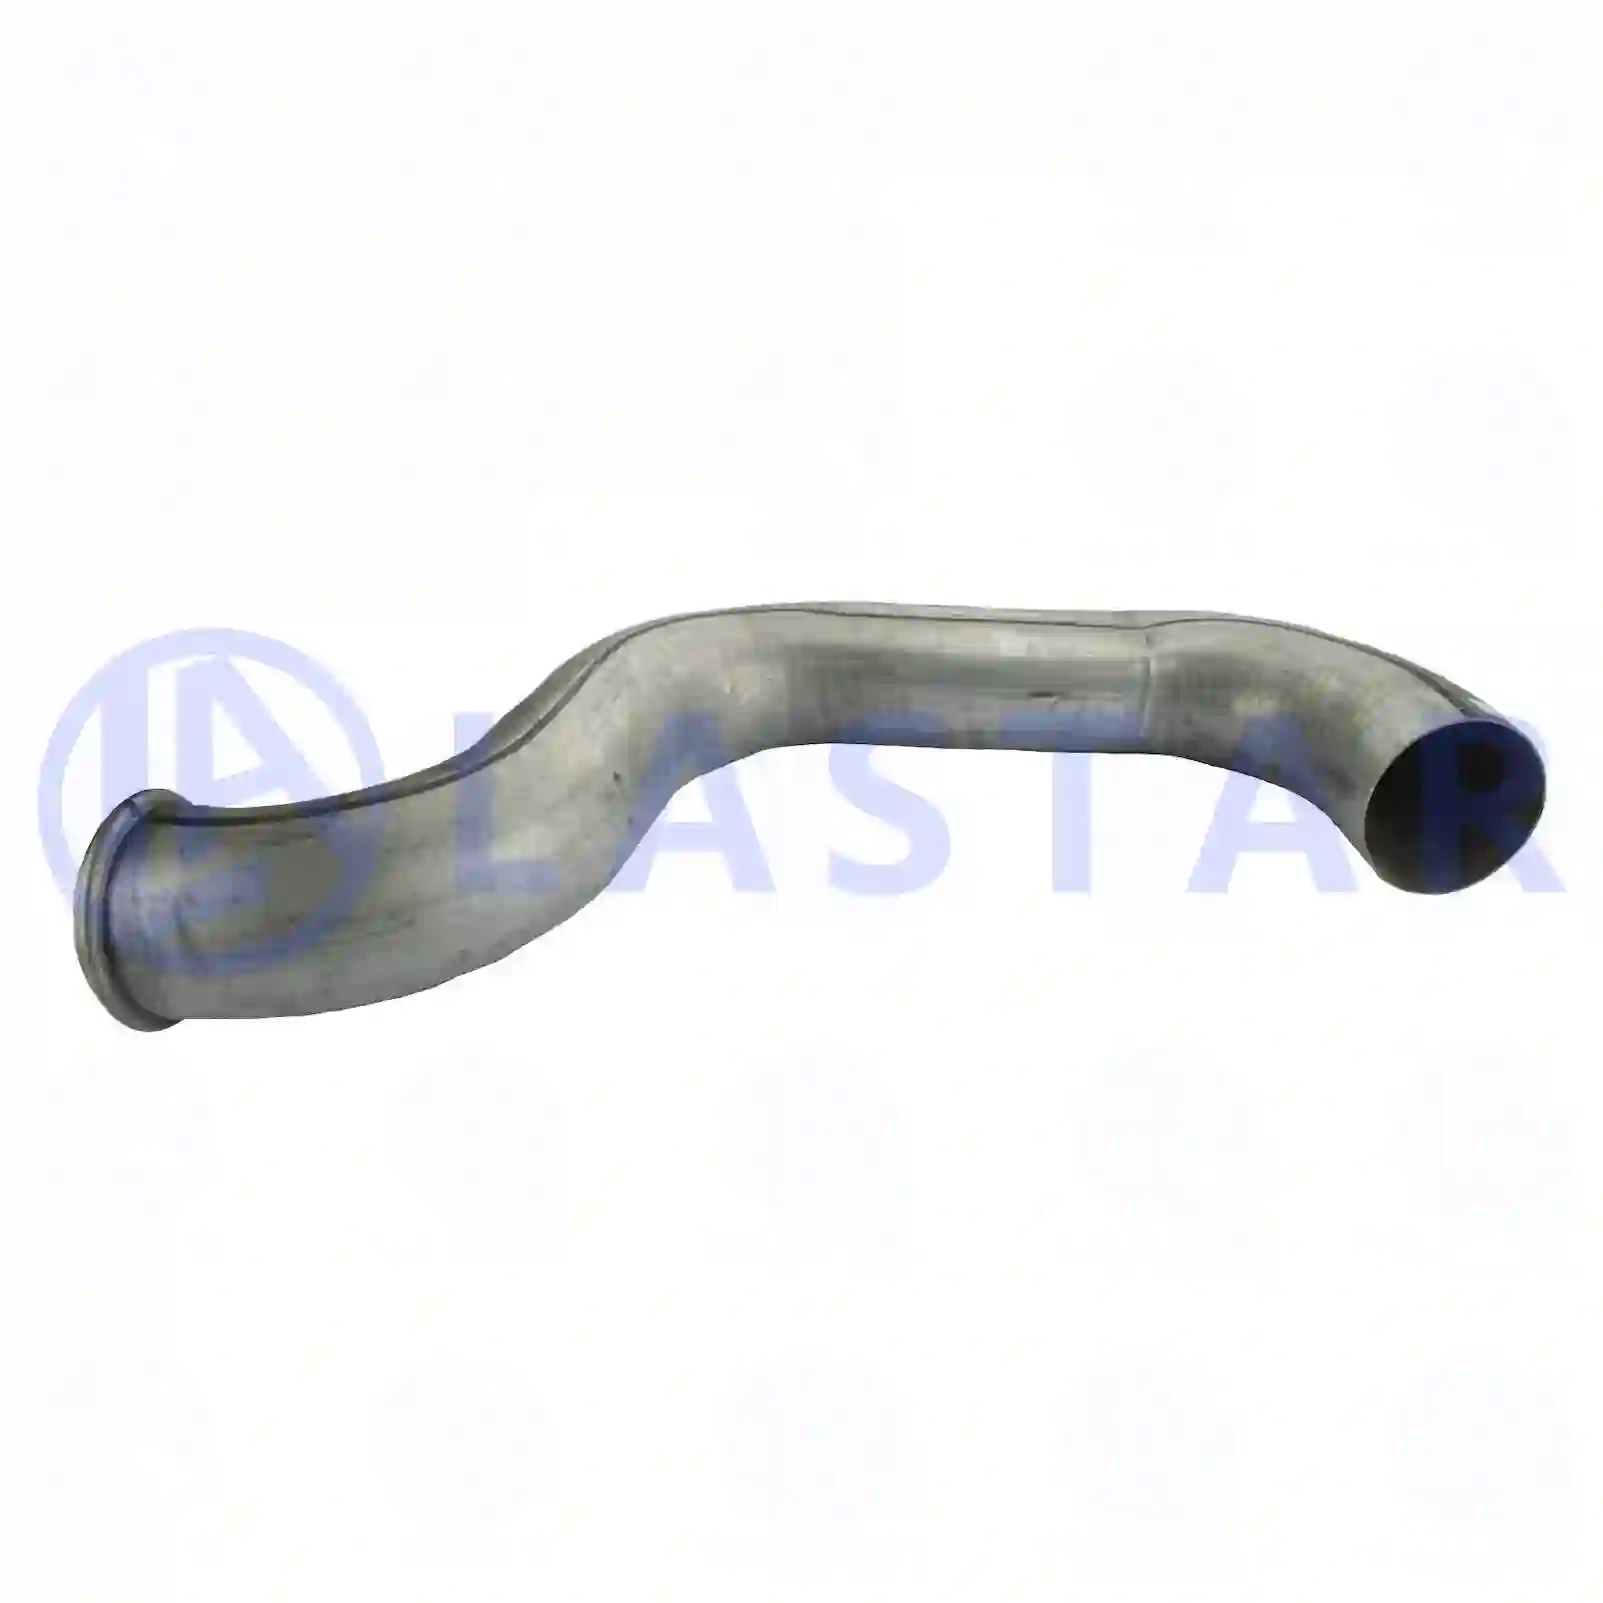 Exhaust pipe, 77706835, 8147305 ||  77706835 Lastar Spare Part | Truck Spare Parts, Auotomotive Spare Parts Exhaust pipe, 77706835, 8147305 ||  77706835 Lastar Spare Part | Truck Spare Parts, Auotomotive Spare Parts